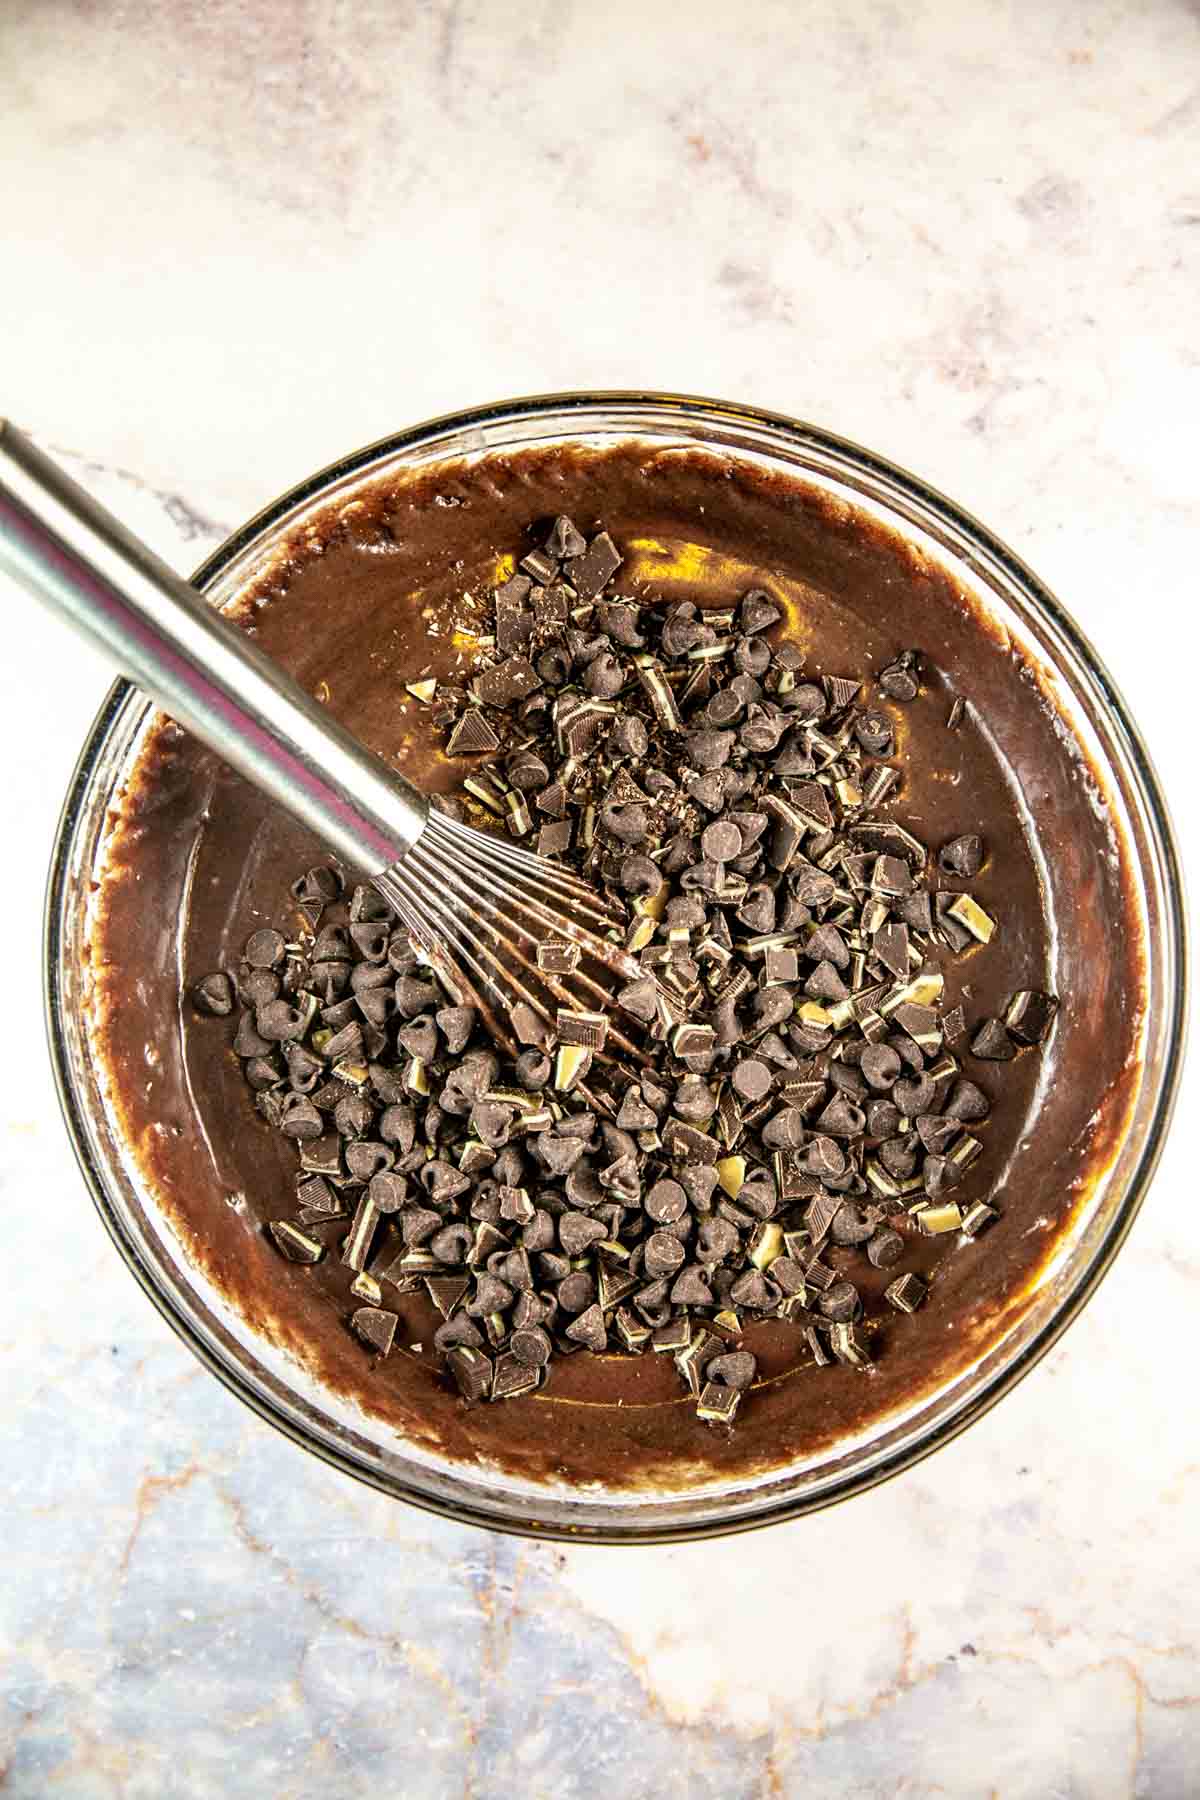 Chocolate being mixed into the chocolate cake batter in a glass mixing bowl. 